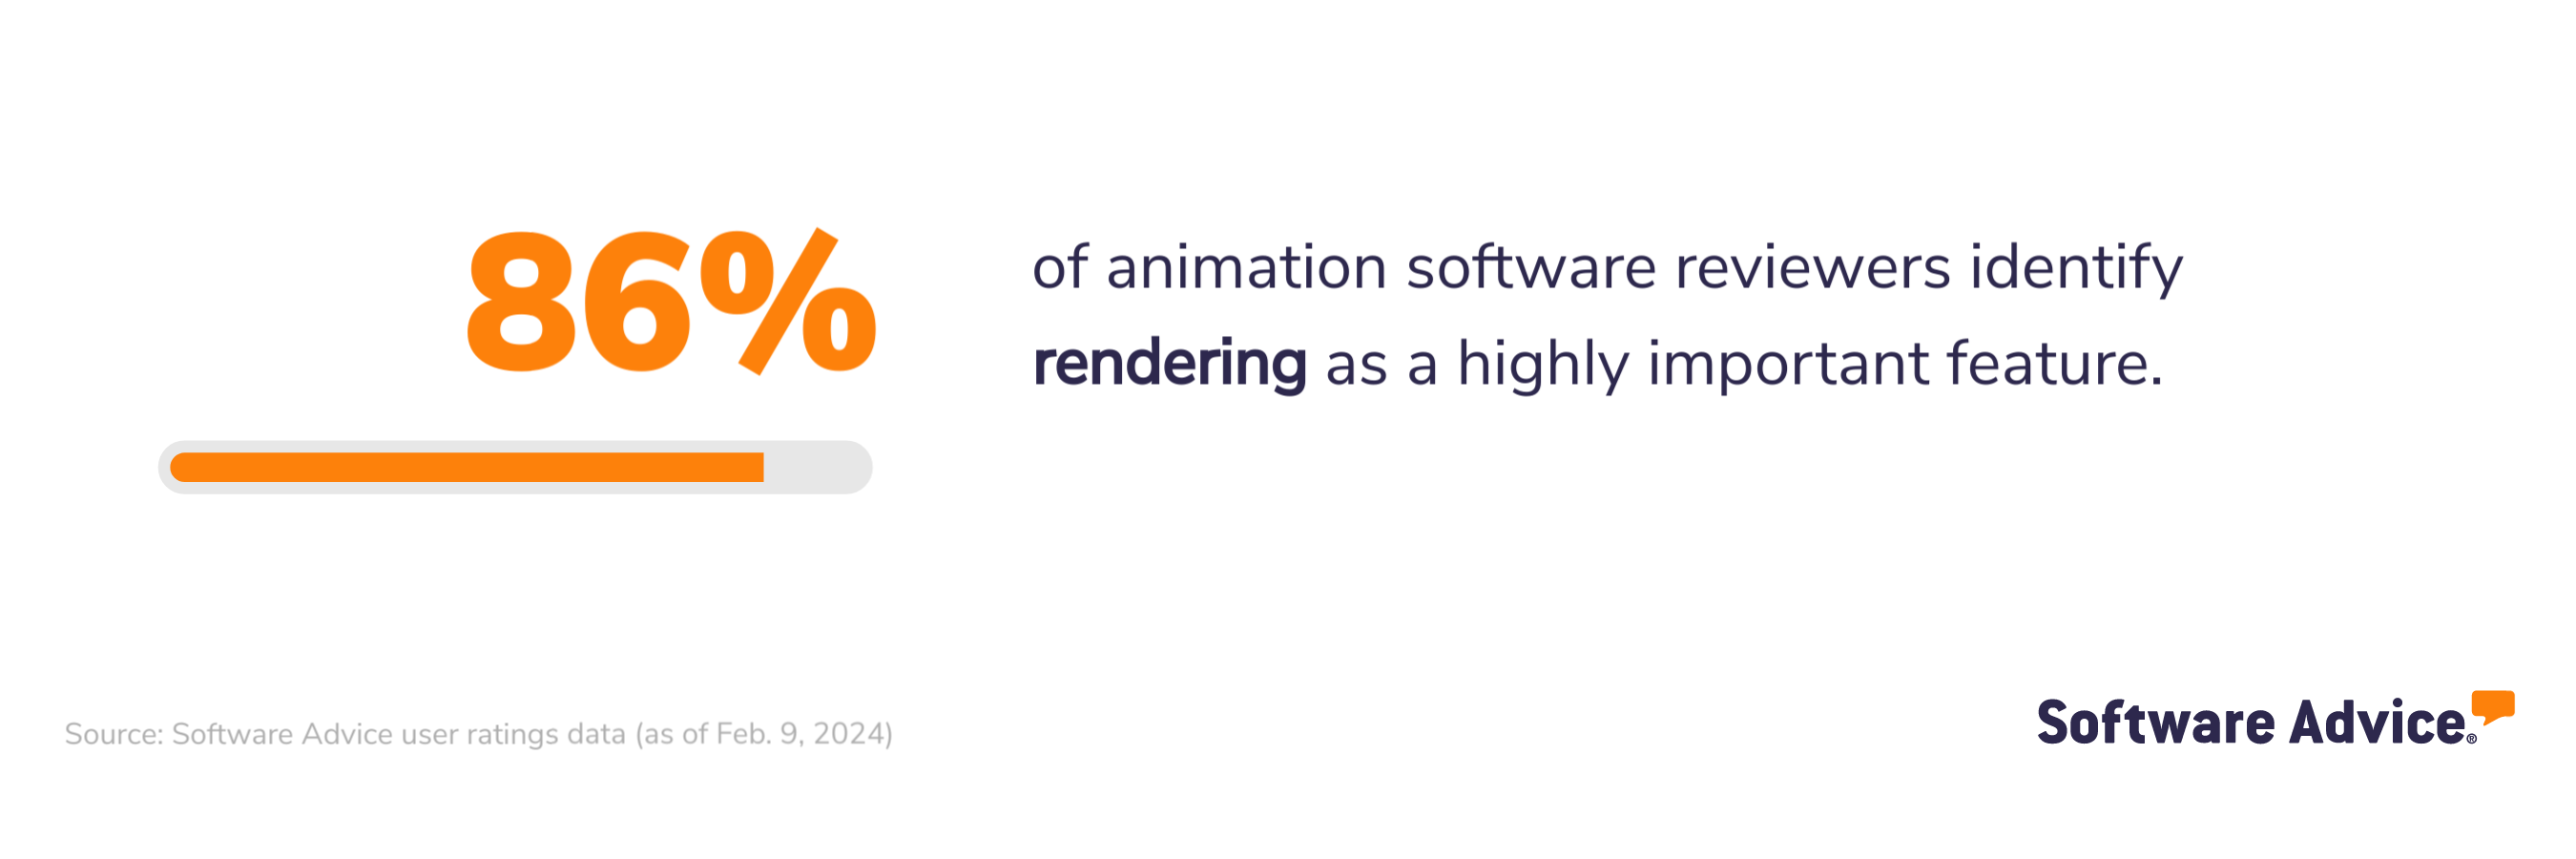 86% of animation software reviewers identify rendering as a highly important feature